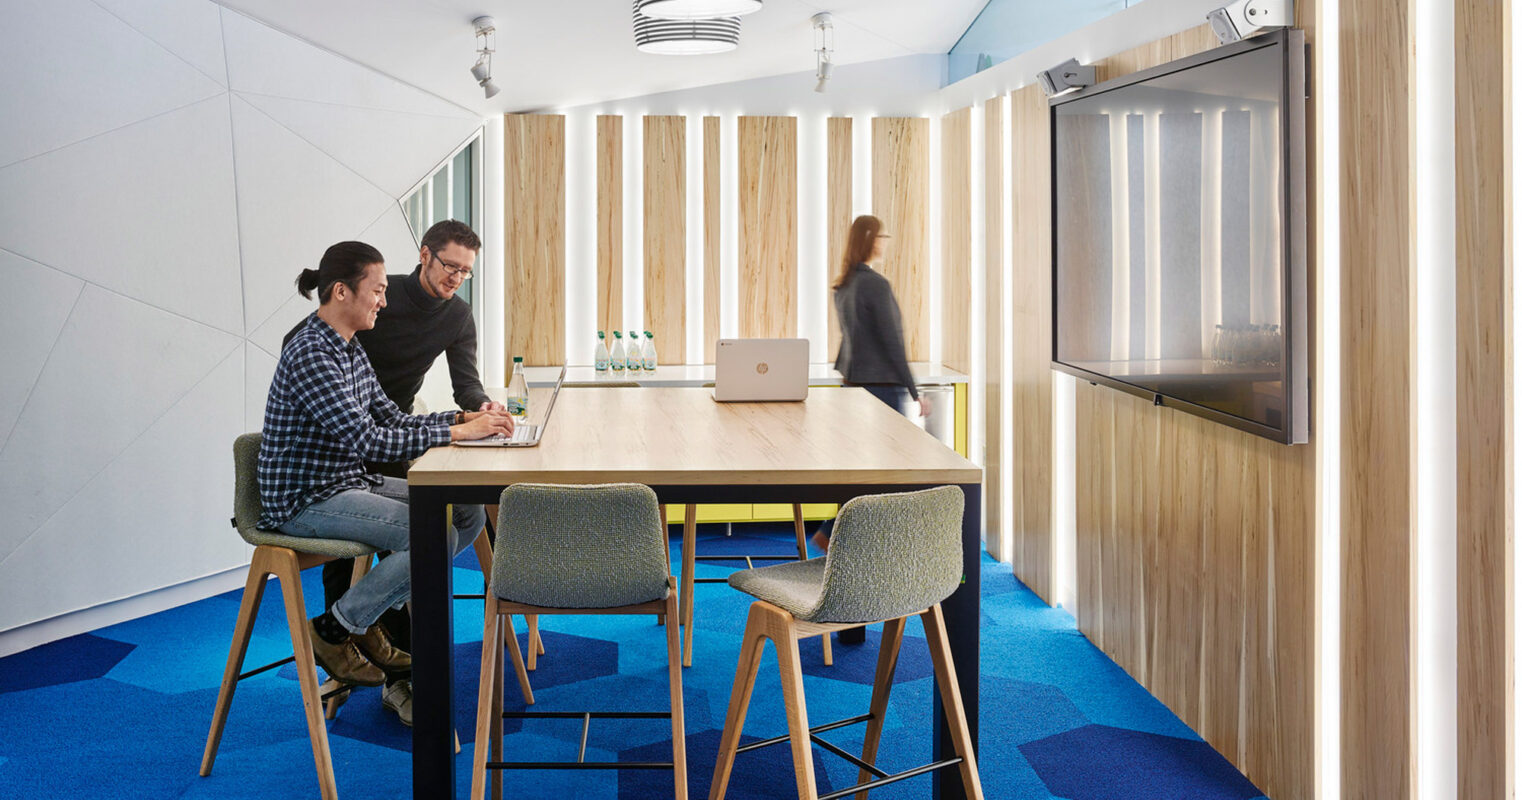 Modern office space with two people collaborating at a table featuring vibrant blue carpet, angular white walls, and a sleek wooden partition. Geometric design elements and a pendant light add to the contemporary aesthetic.